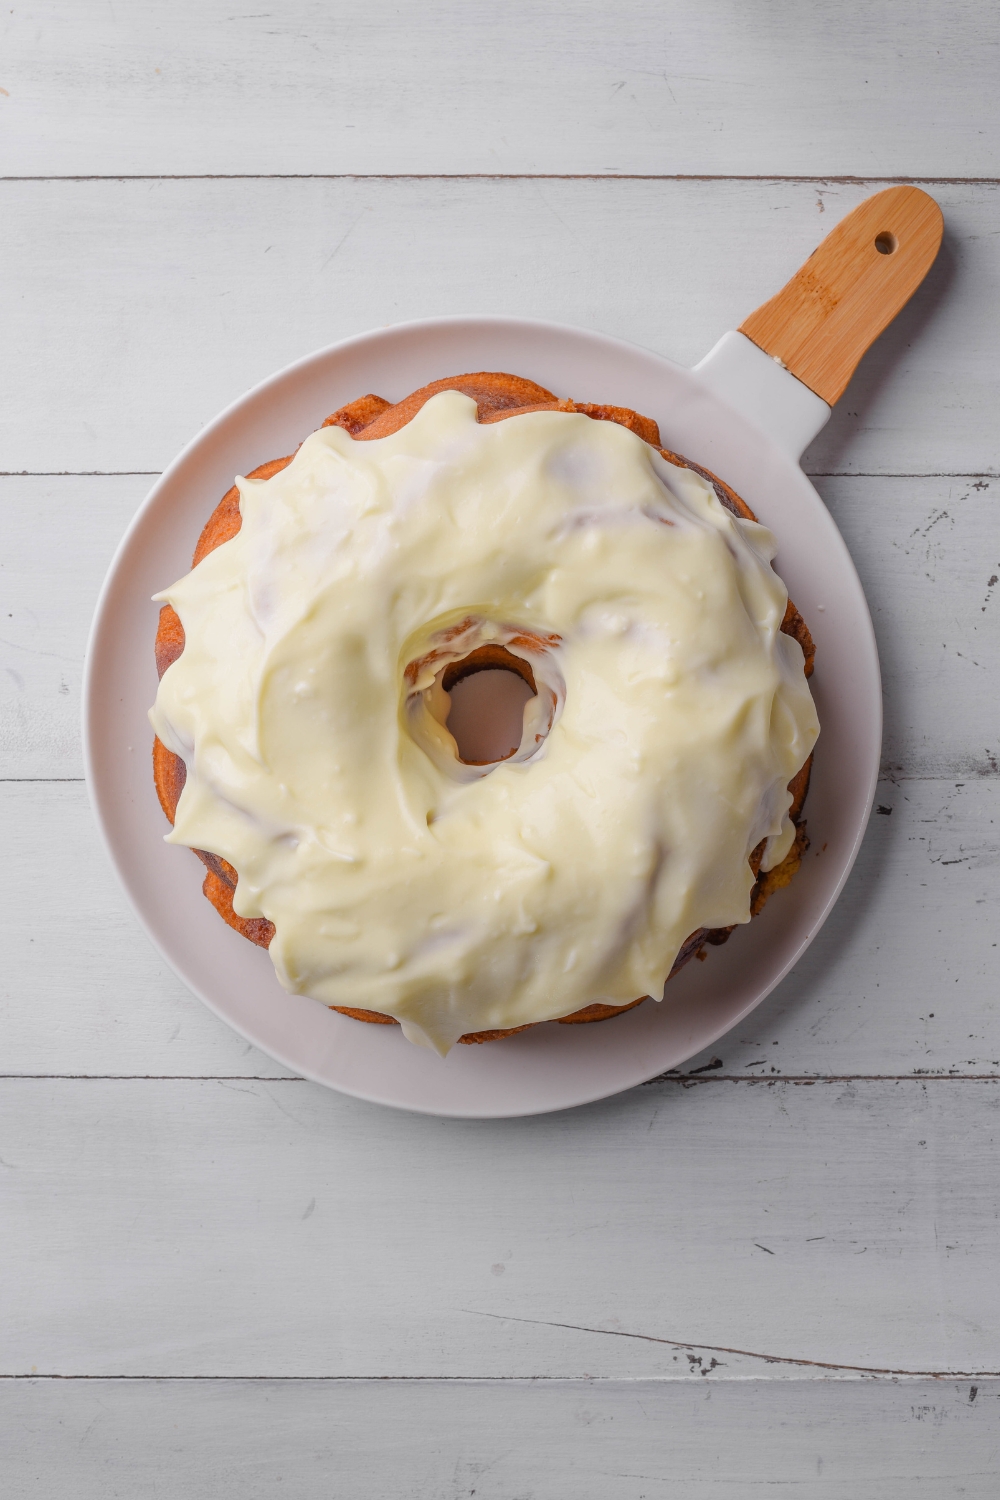 A frosted cinnamon bundt cake sits on a white and wooden serving platter.